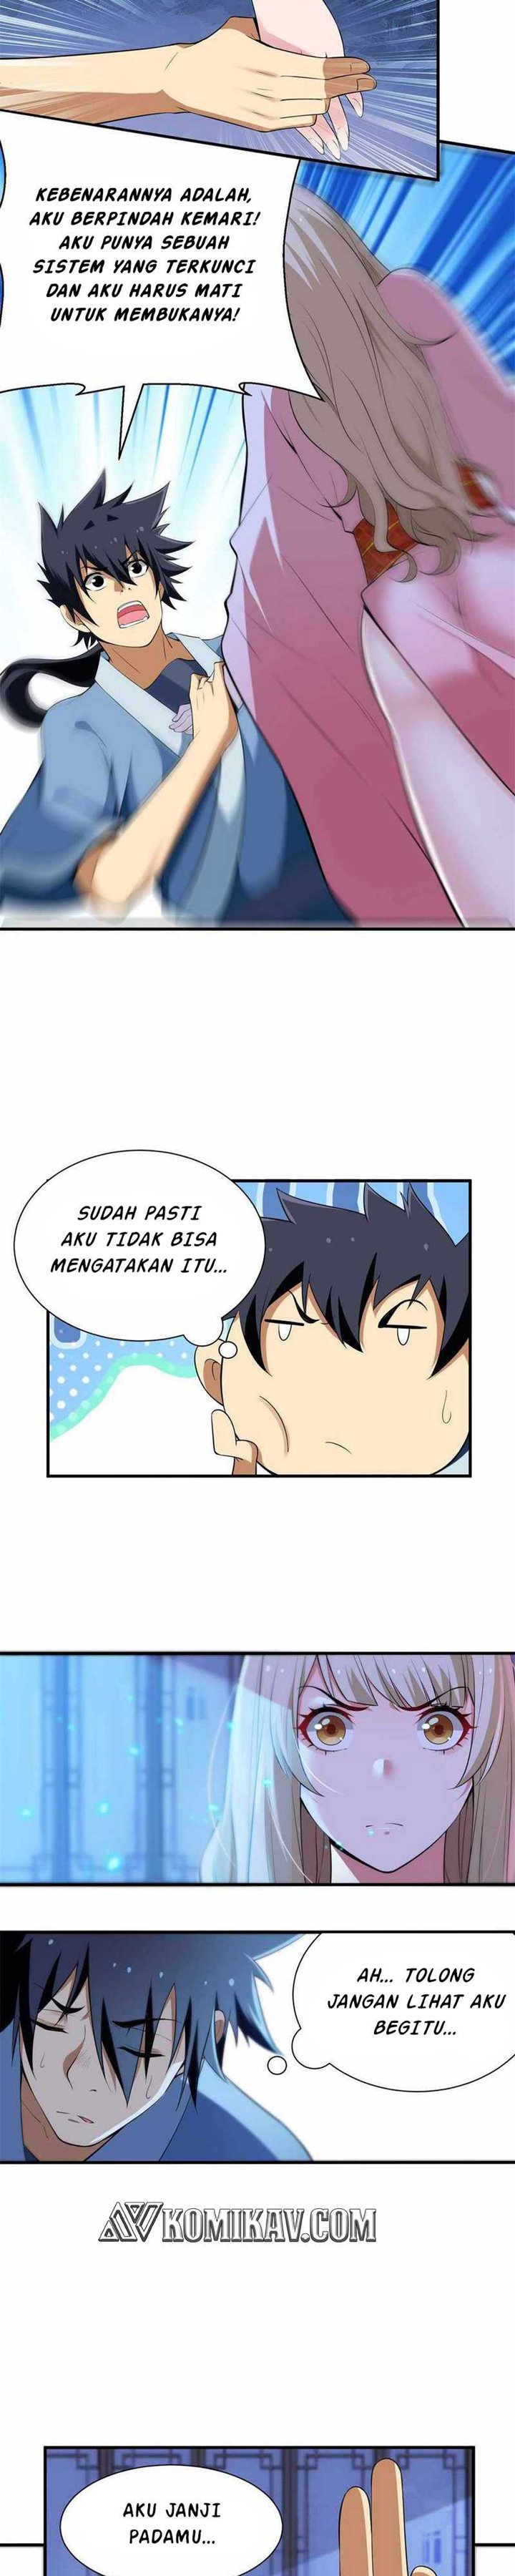 Dilarang COPAS - situs resmi www.mangacanblog.com - Komik i just want to be beaten to death by everyone 015 - chapter 15 16 Indonesia i just want to be beaten to death by everyone 015 - chapter 15 Terbaru 8|Baca Manga Komik Indonesia|Mangacan